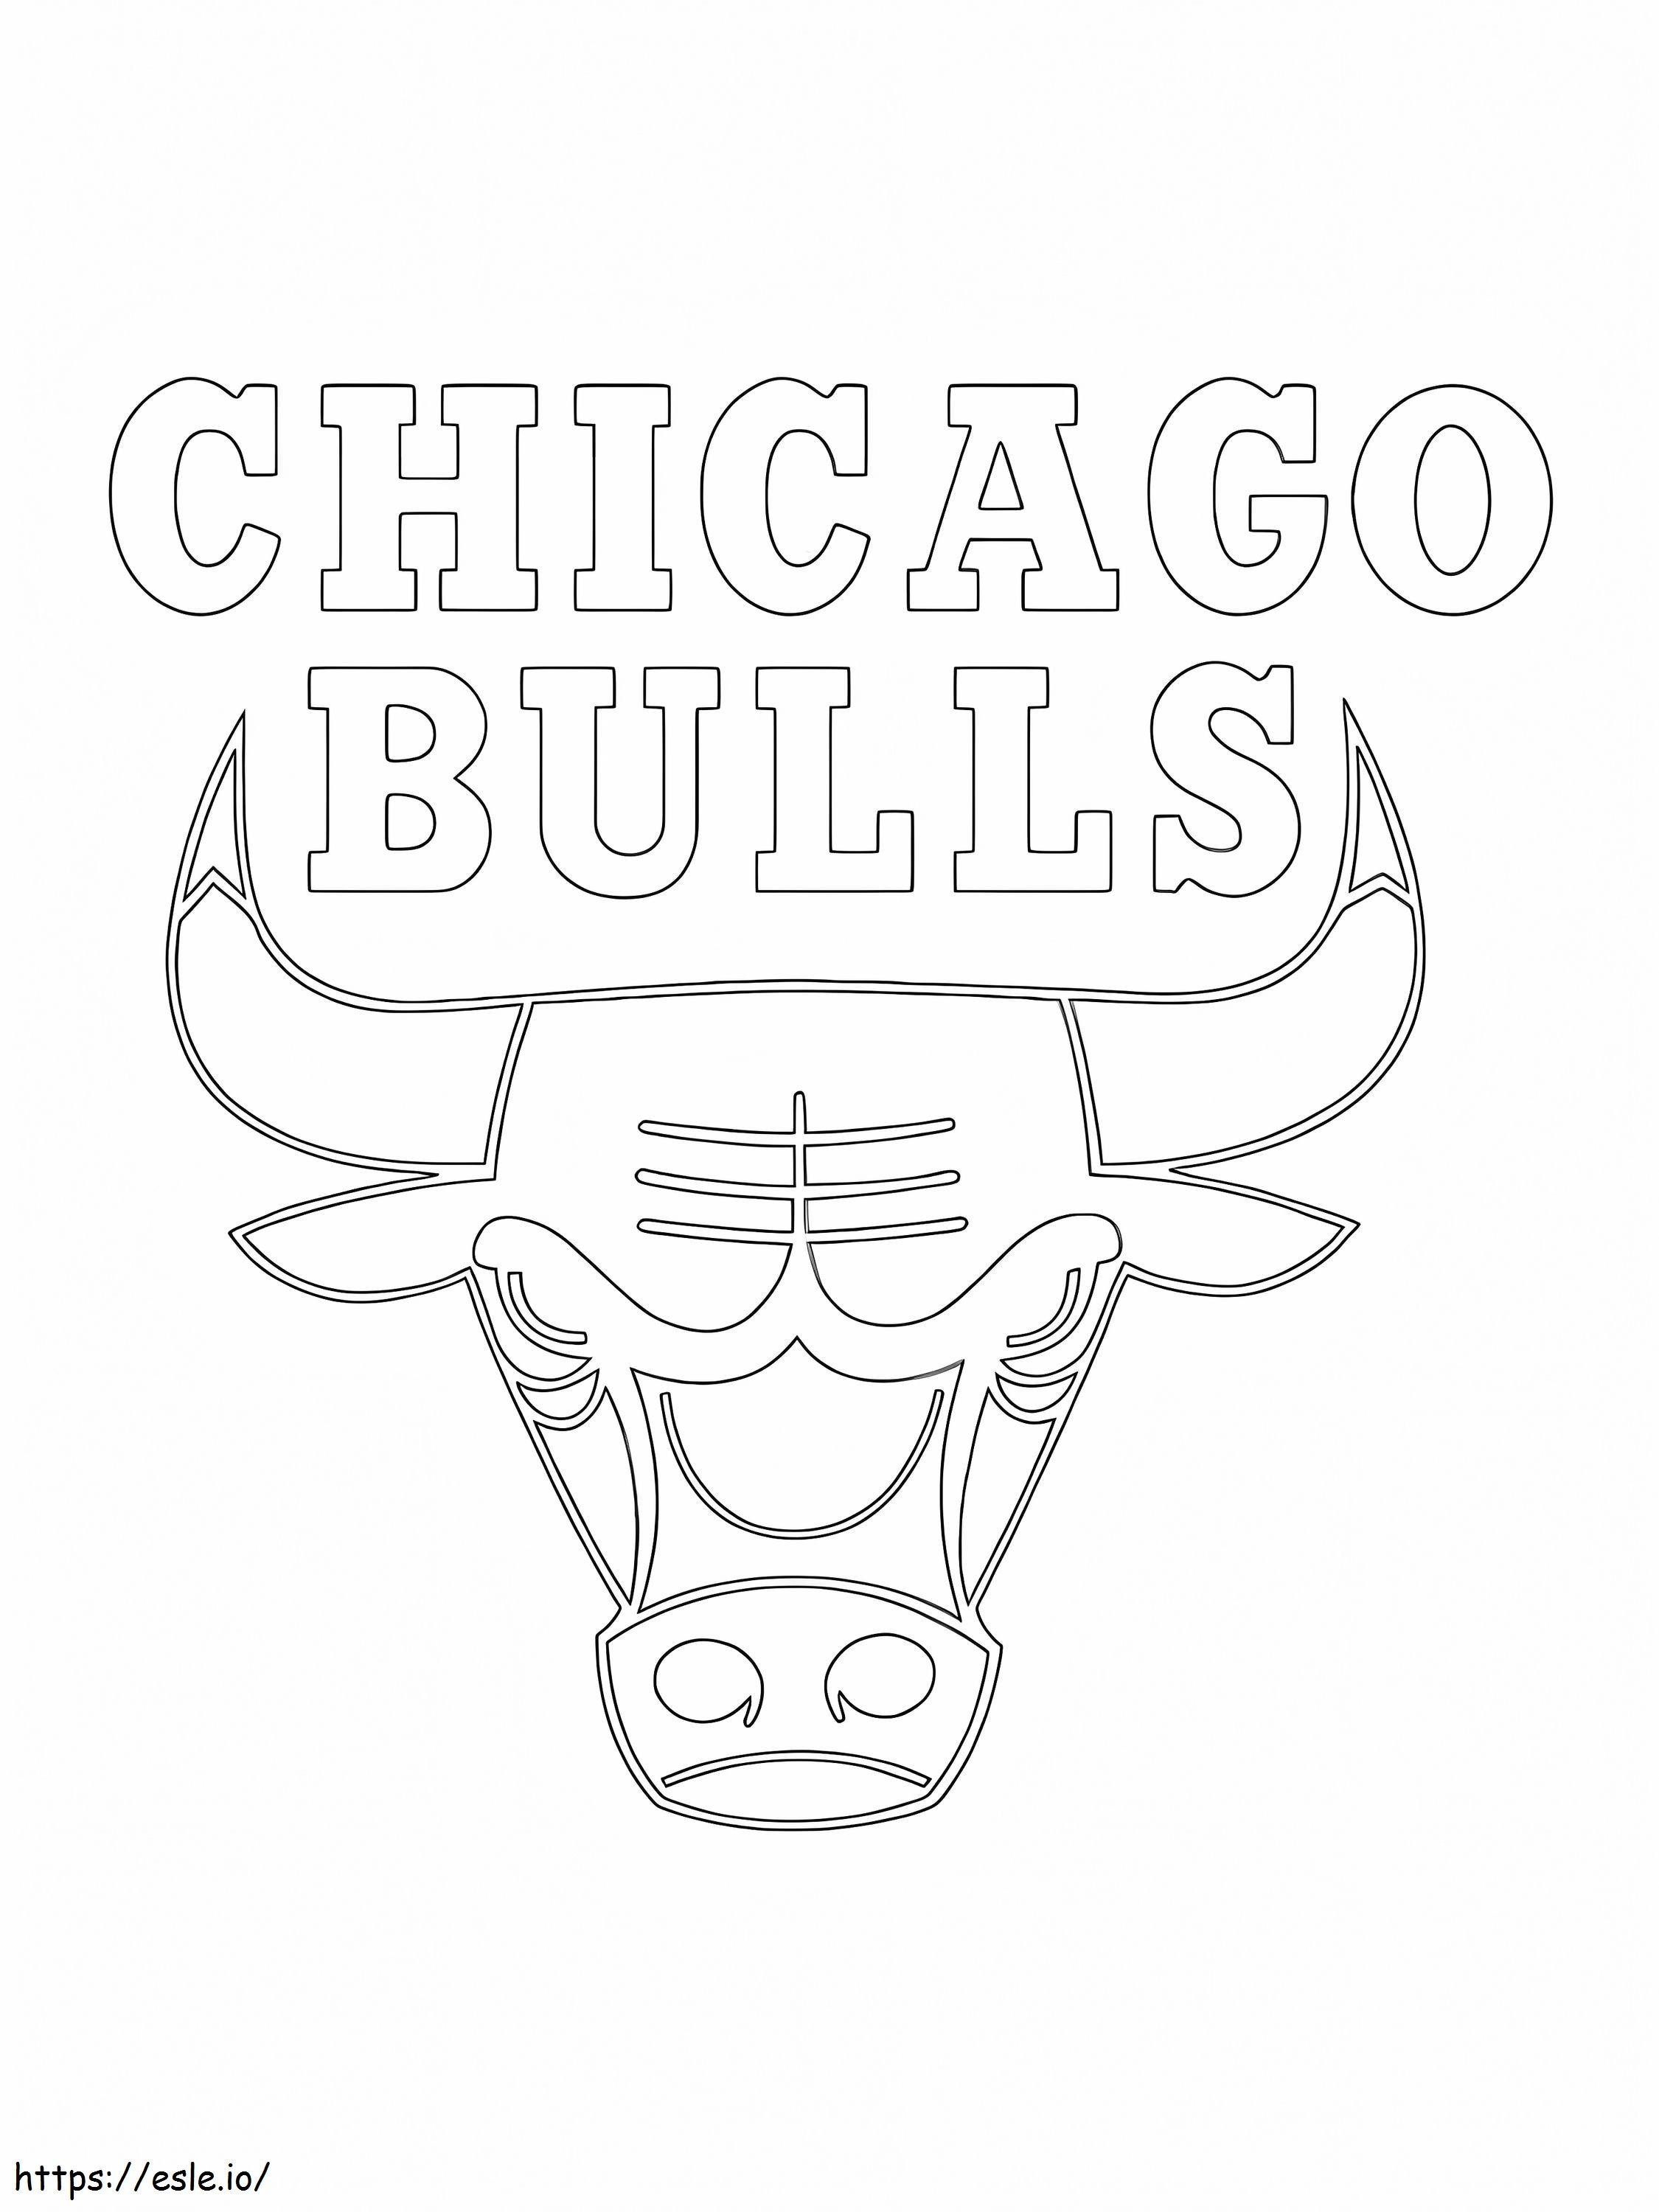 Chicago Bulls Logo coloring page